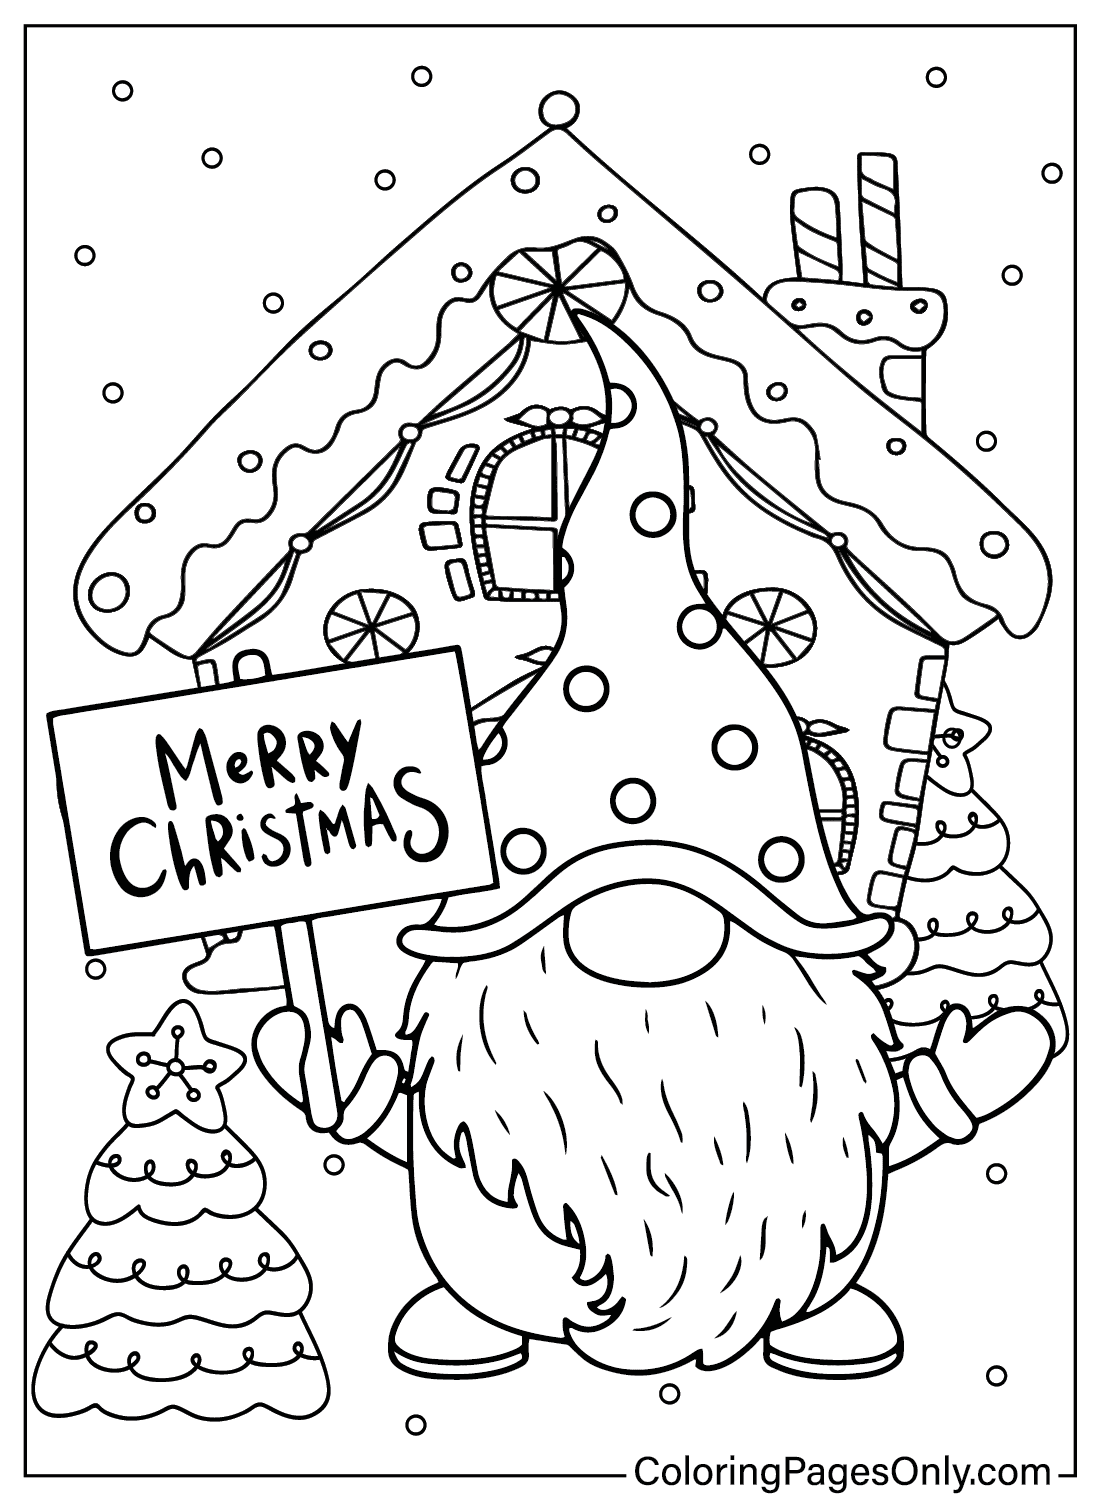 Gnome Coloring Page Printable from Gnome